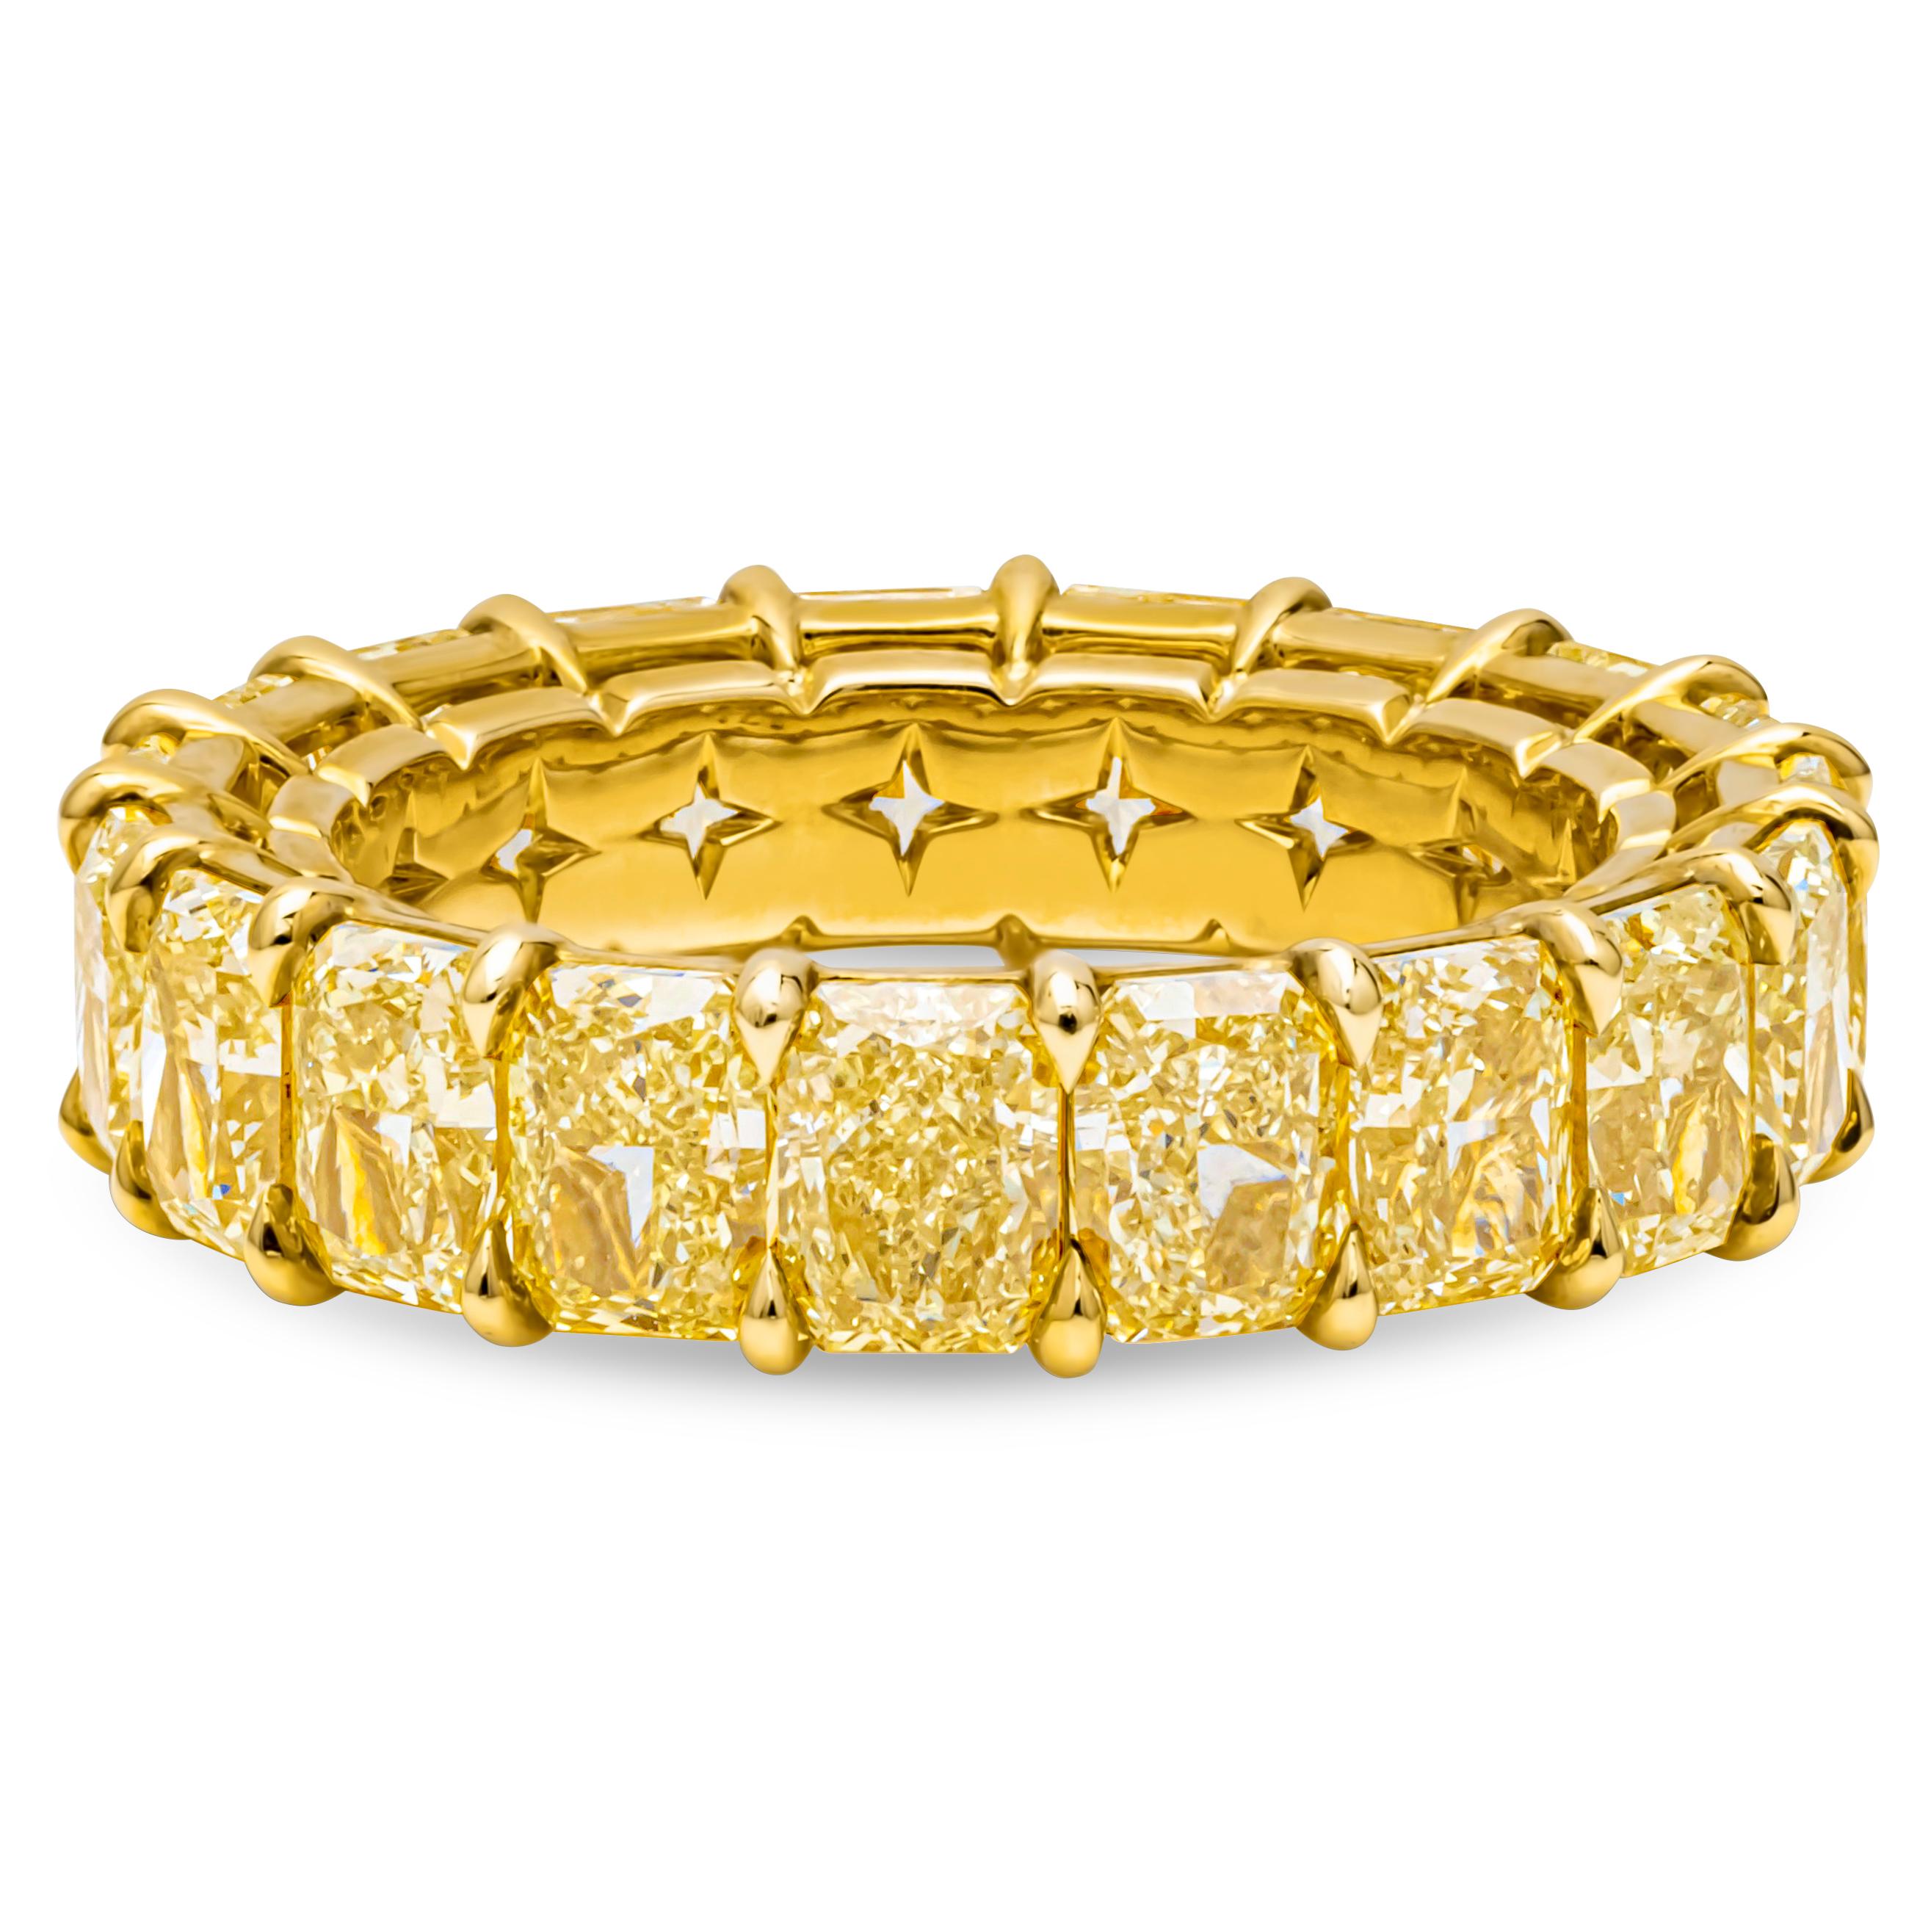 A gorgeous eternity wedding band set with 19 stunning radiant cut Fancy Yellow Diamonds, VS+ in Clarity, set in a timeless shared prong setting. Diamonds Weigh 7.80 carats total and Set in 18K Yellow Gold. Size 6 US resizable upon request.

Style